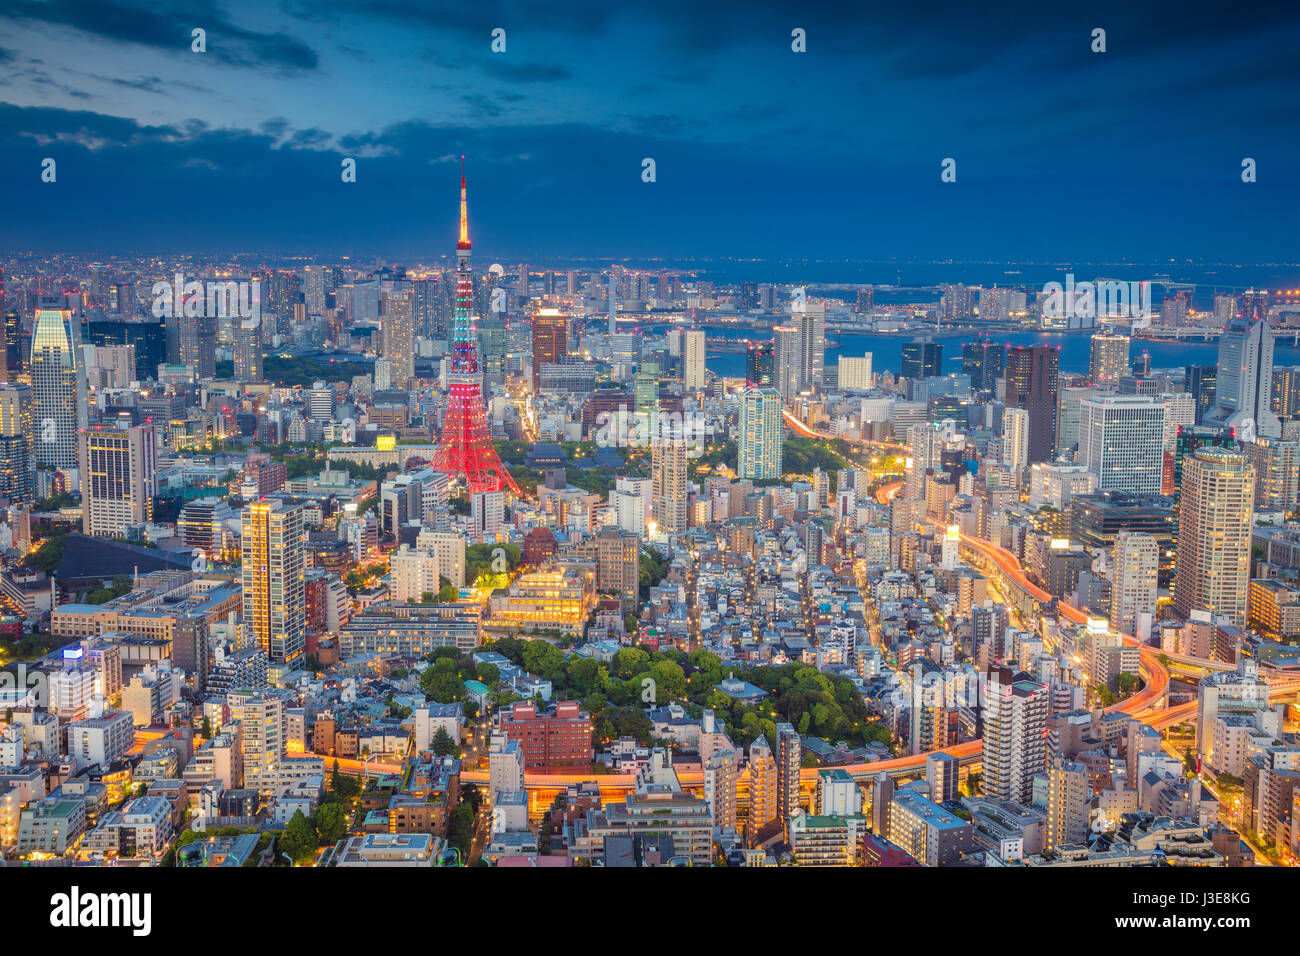 Tokyo. Cityscape image of Tokyo, Japan during twilight blue hour. Stock Photo